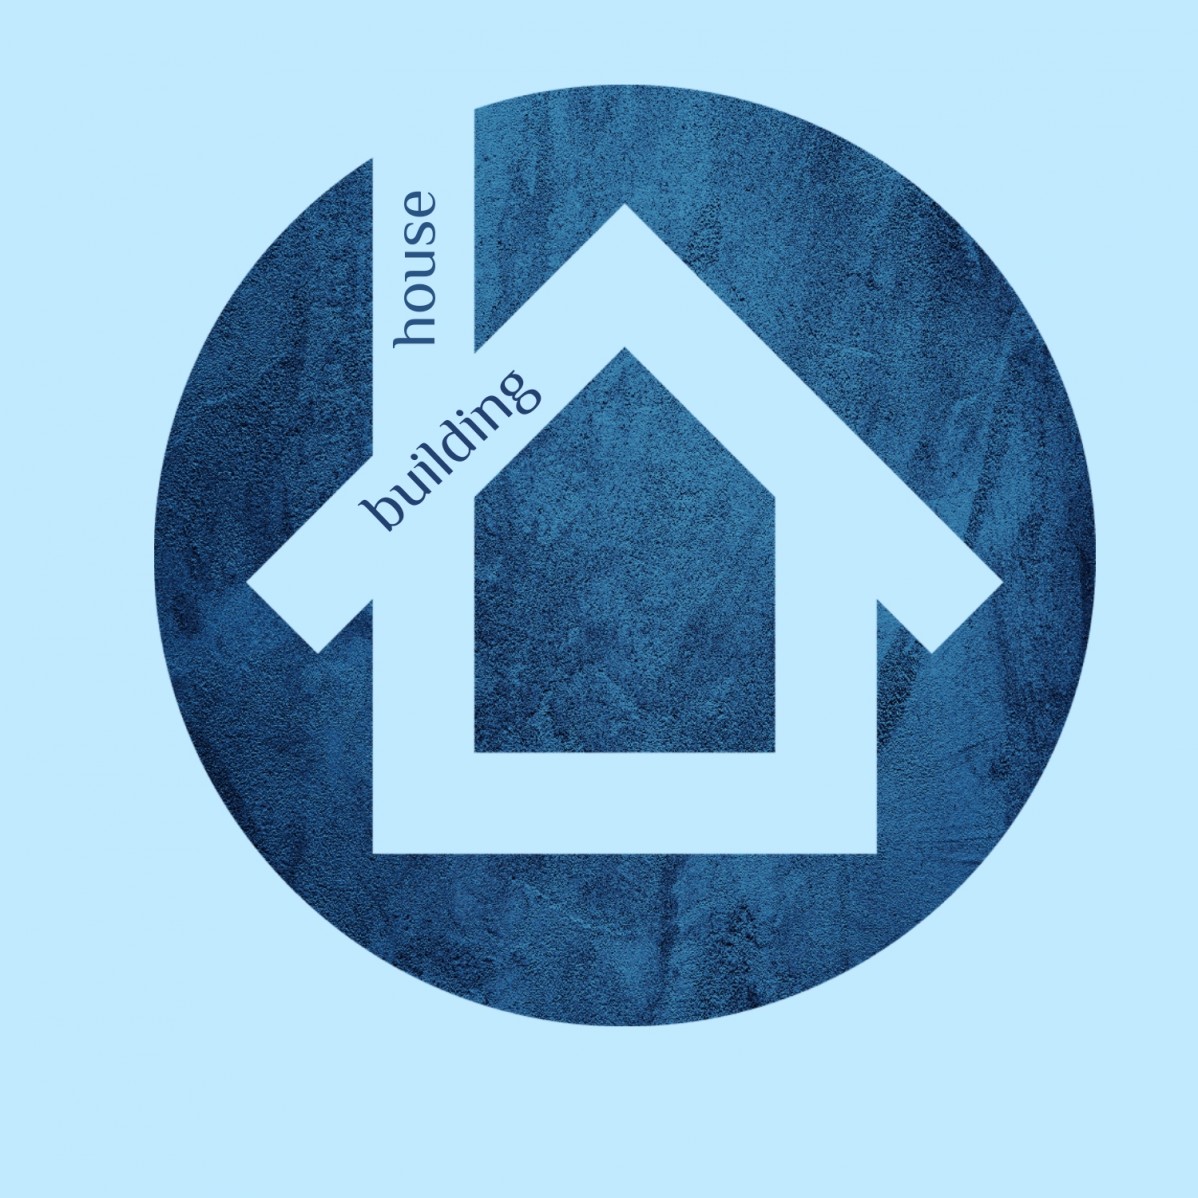 Architecture, Real estate company, appraiser or mortgage institution Logo Template